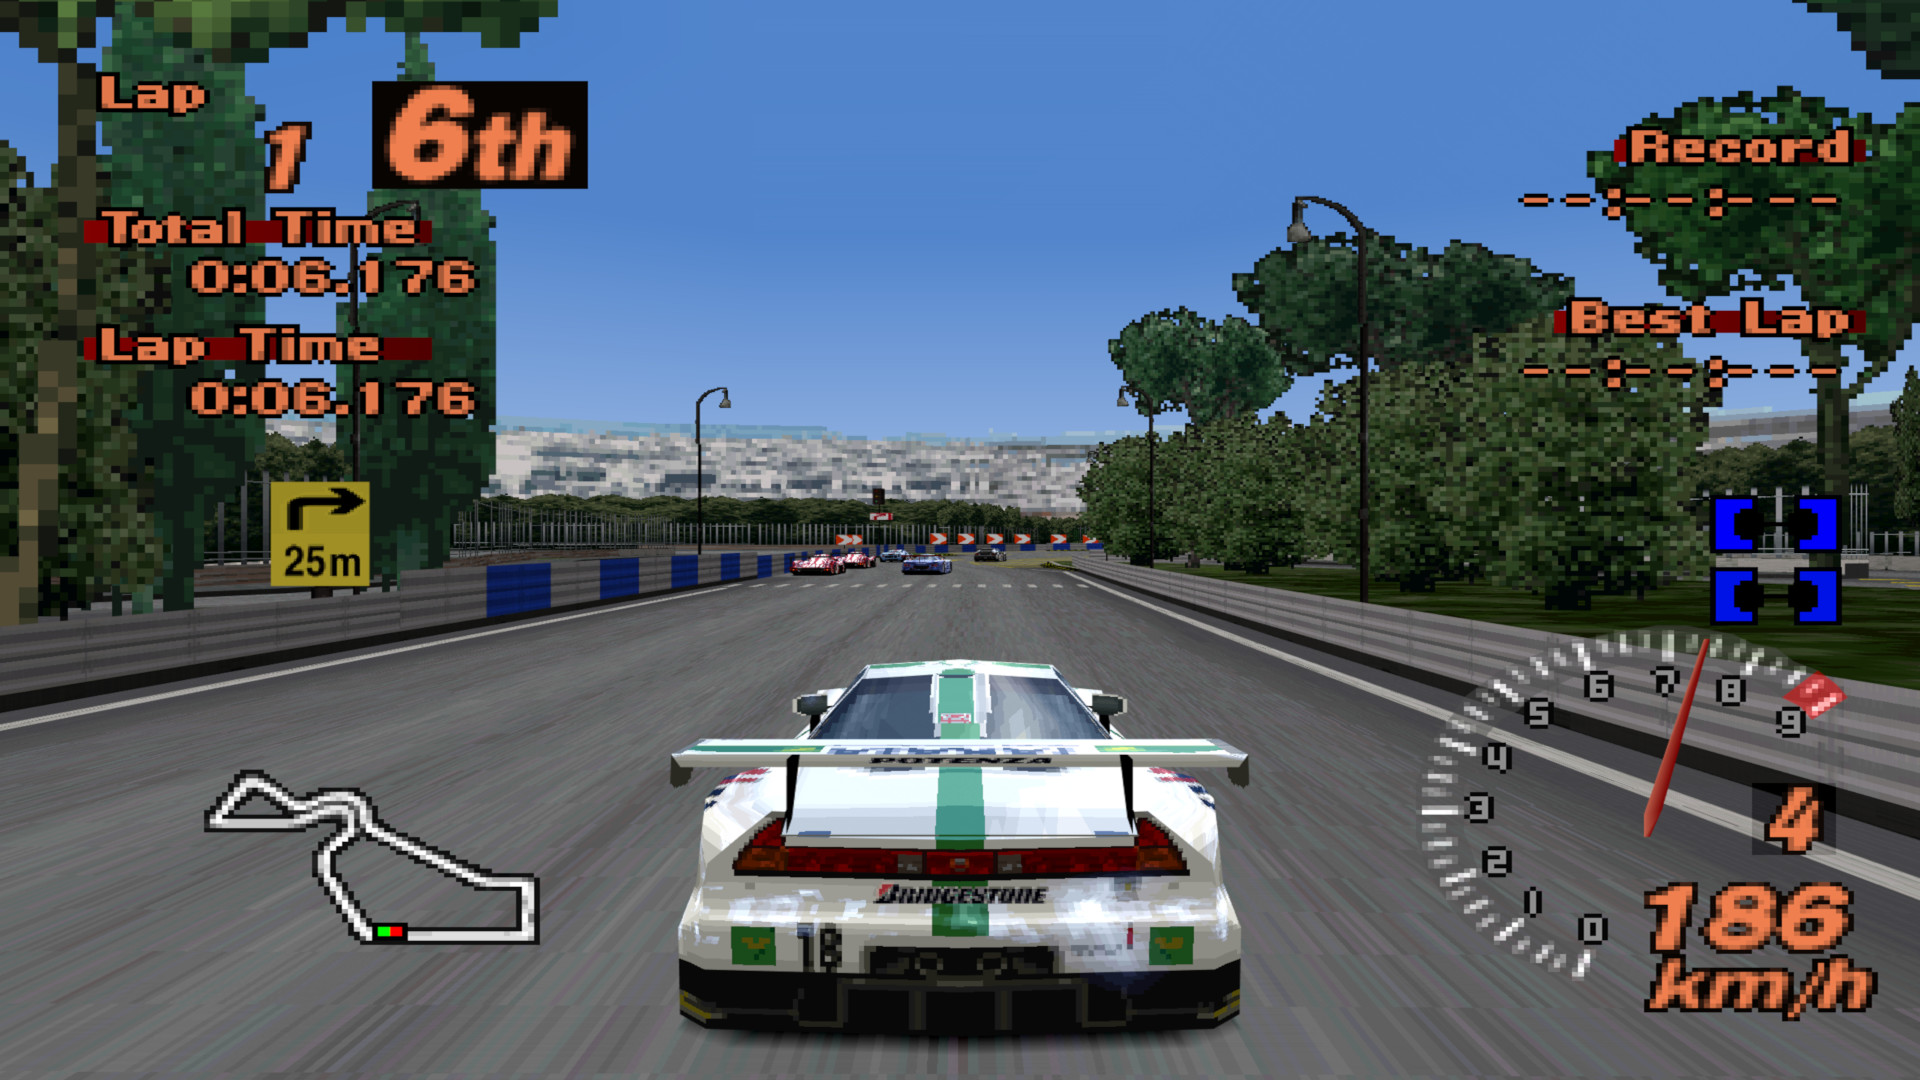 Gran Turismo 4 new cheat codes at the end of the video. Part 1